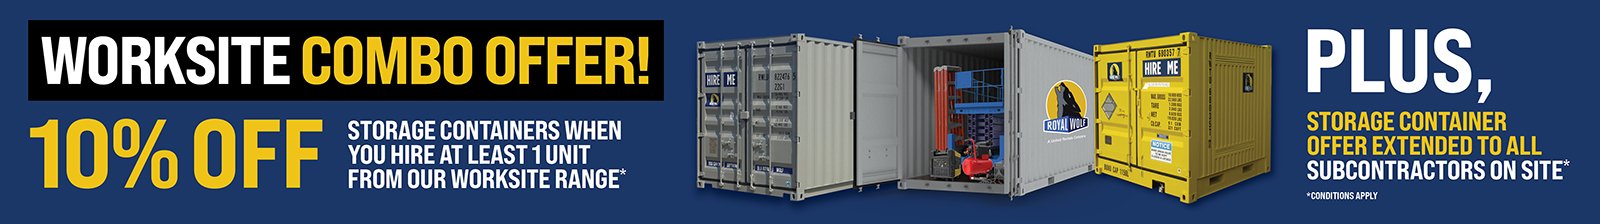 Worksite Combo Offer: 10% off storage containers when you hire at leasr 1 unit from our worksite range, plus, storage container offer extended to all subcontractors on site. Conditions apply.